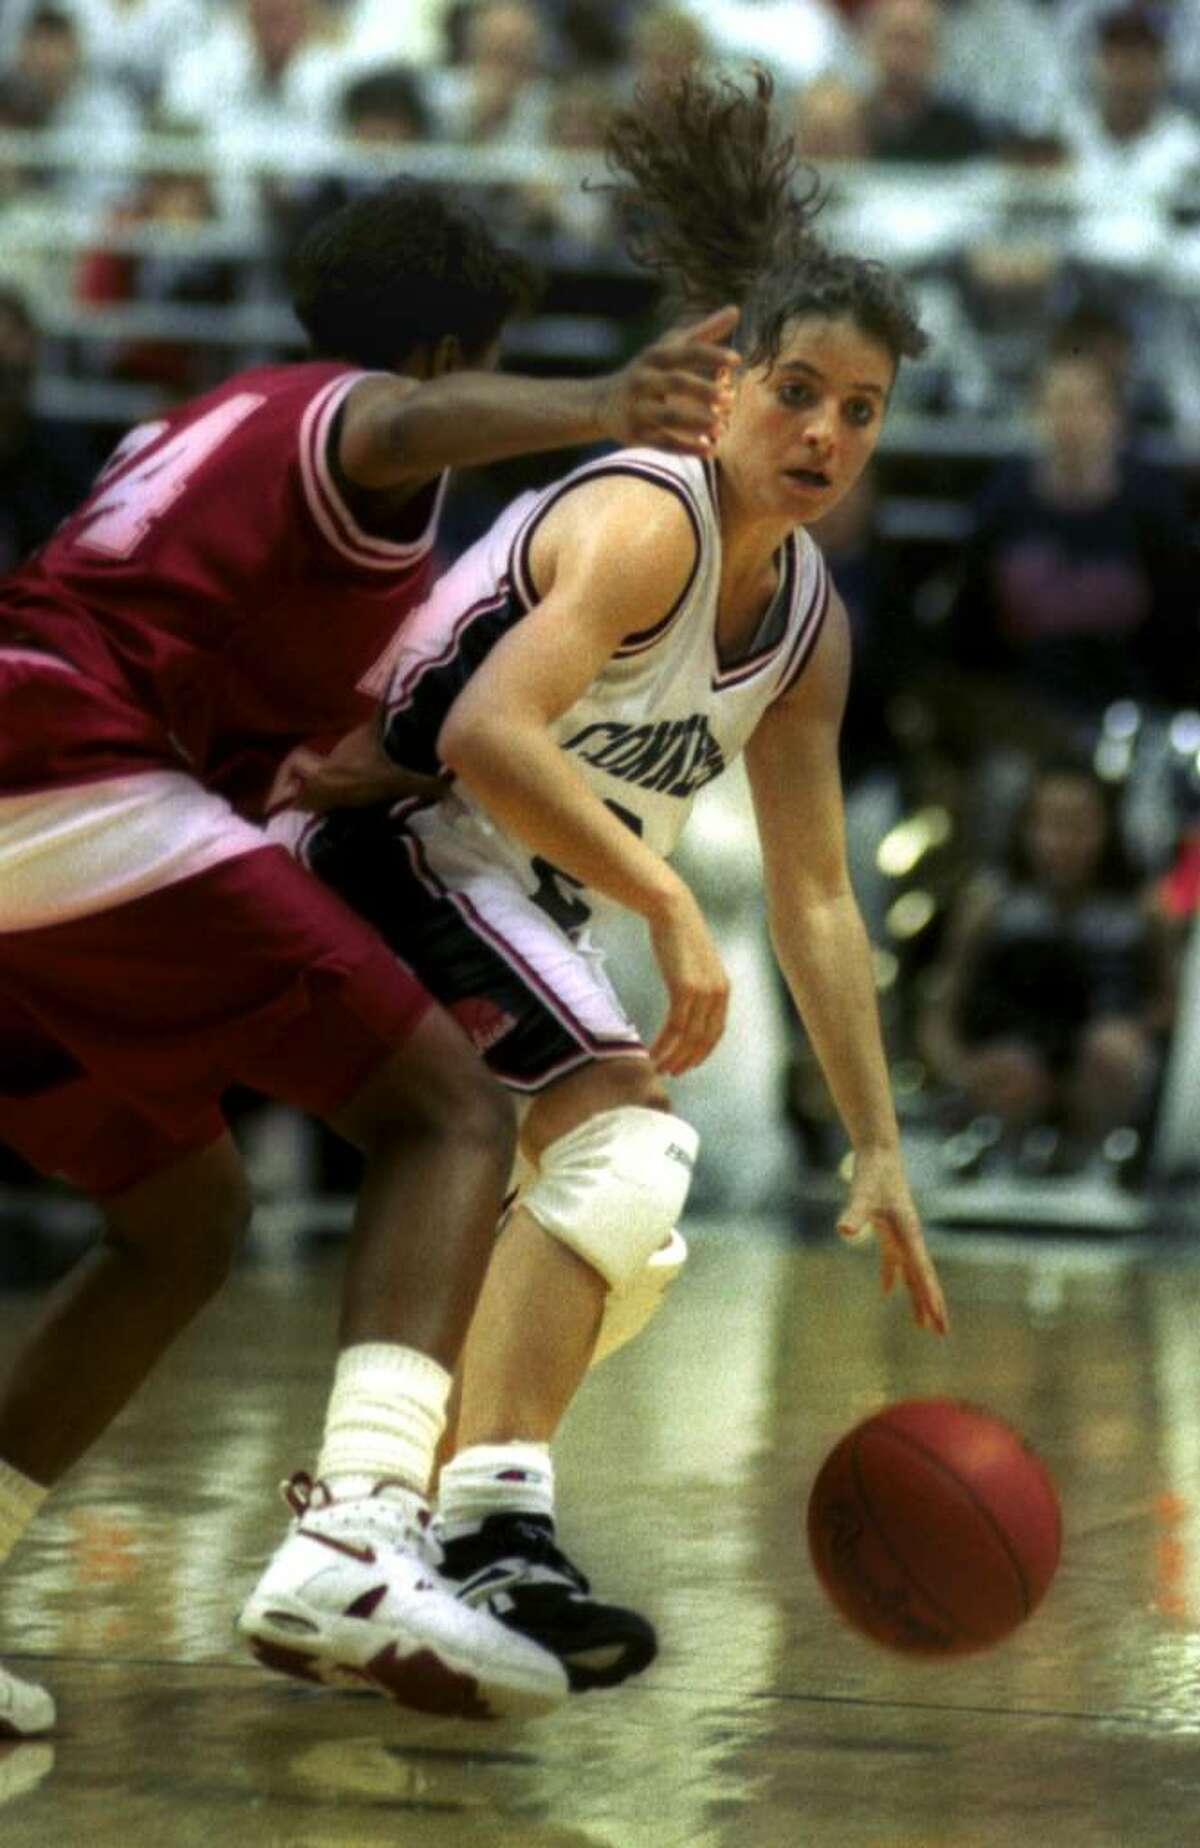 (10) Jennifer Rizzotti was the starting point guard on UConn's first national championship team in 1995. She was named the 1996 Associated Press Player of the Year. During the 1995-96 season, Jennifer set school records for assists with 212 and steals with 112.